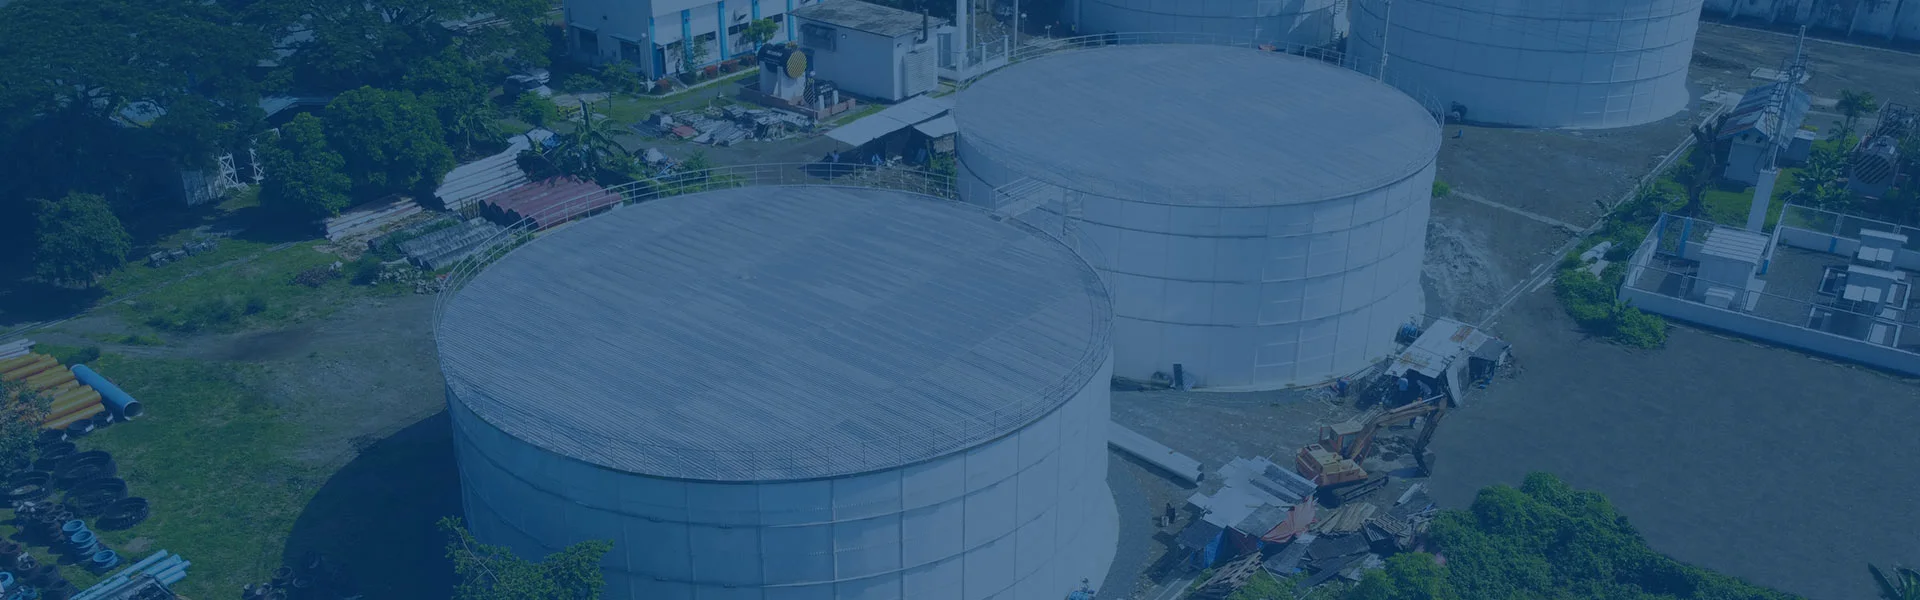 YHR Bolt Steel Tanks Global Project Reference